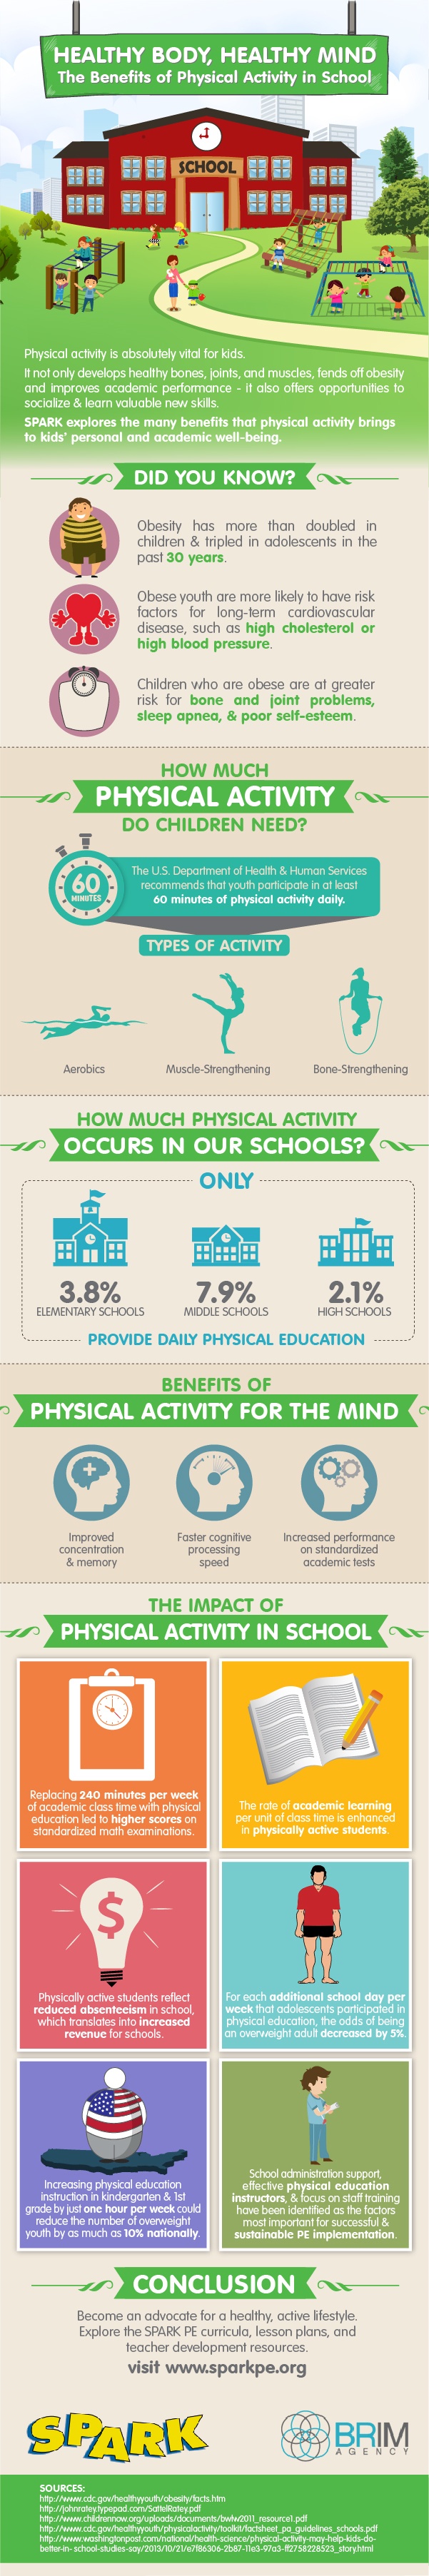 social benefits of physical activity for children